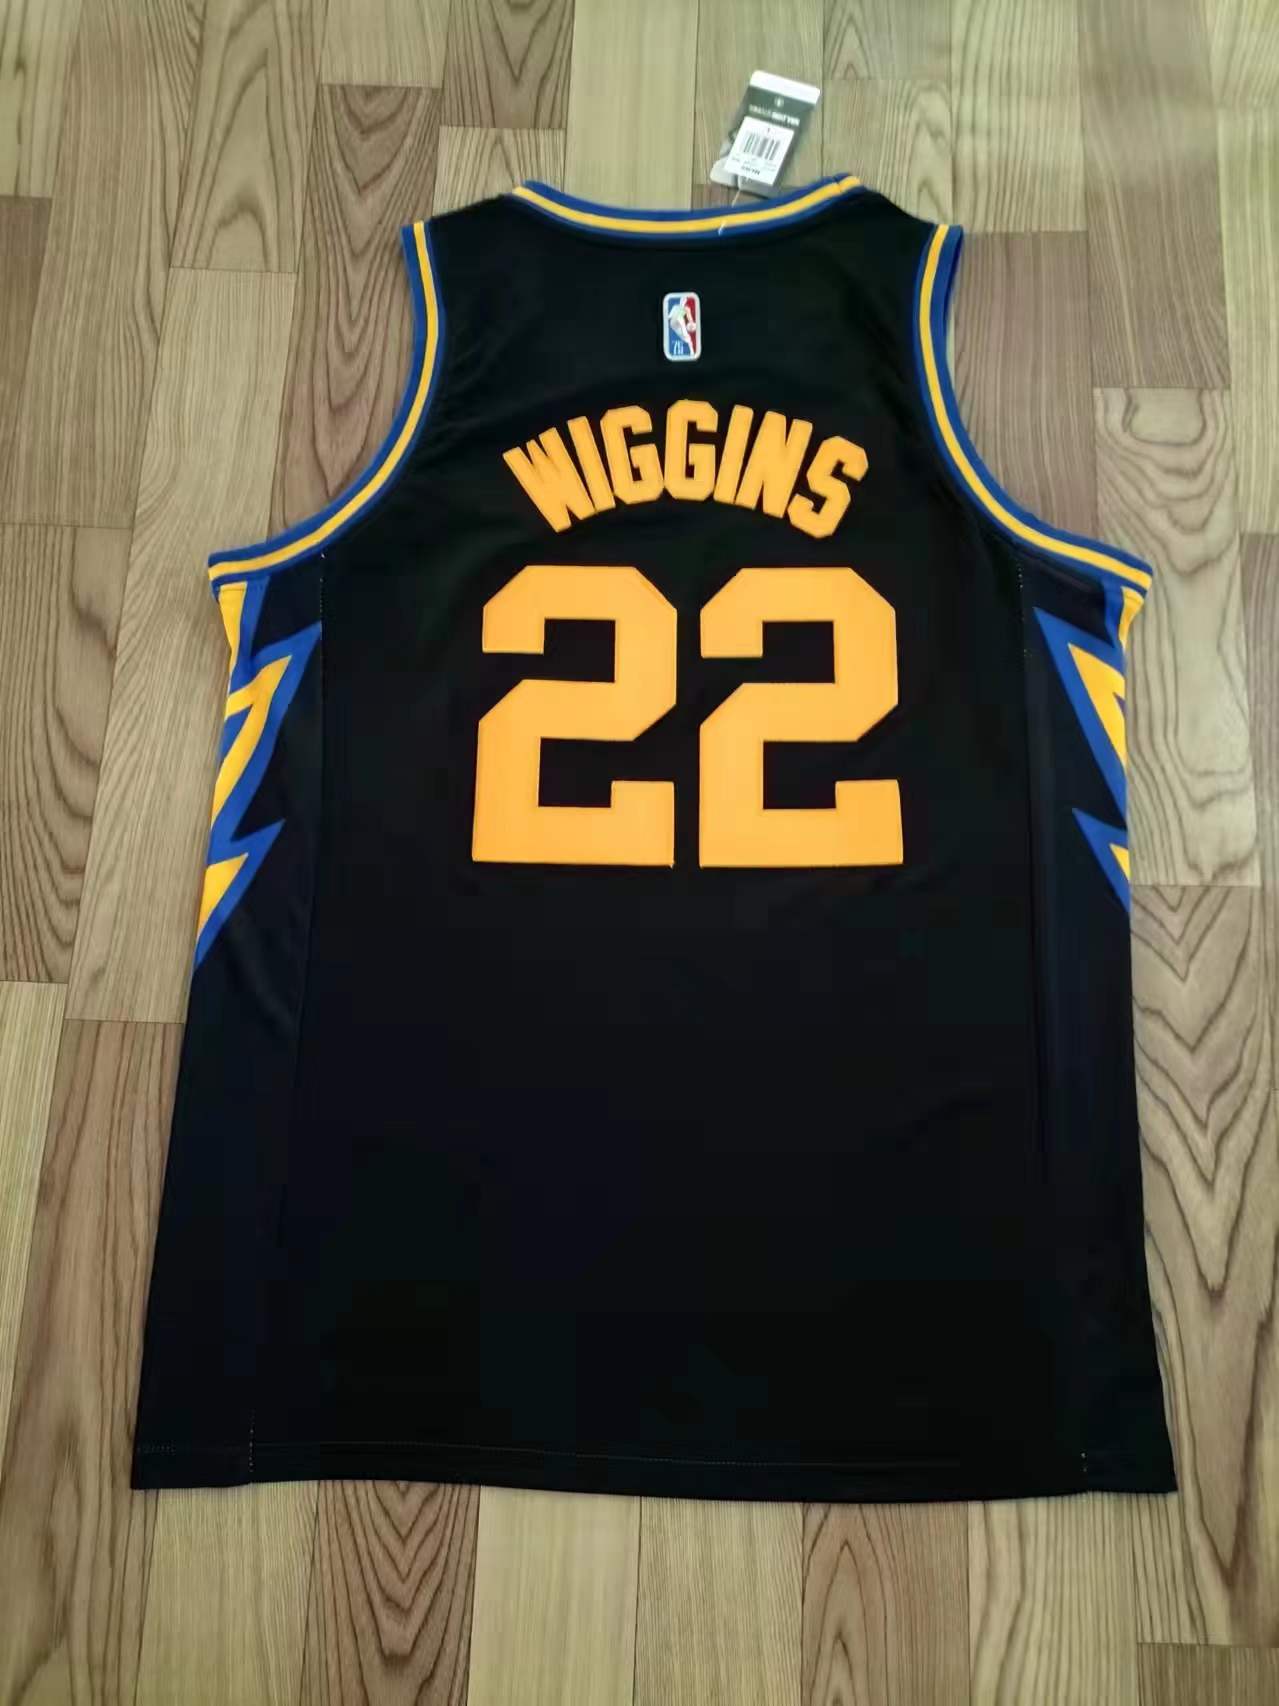 Golden State Warriors Andrew Wiggins No. 22 2021-22 City Edition